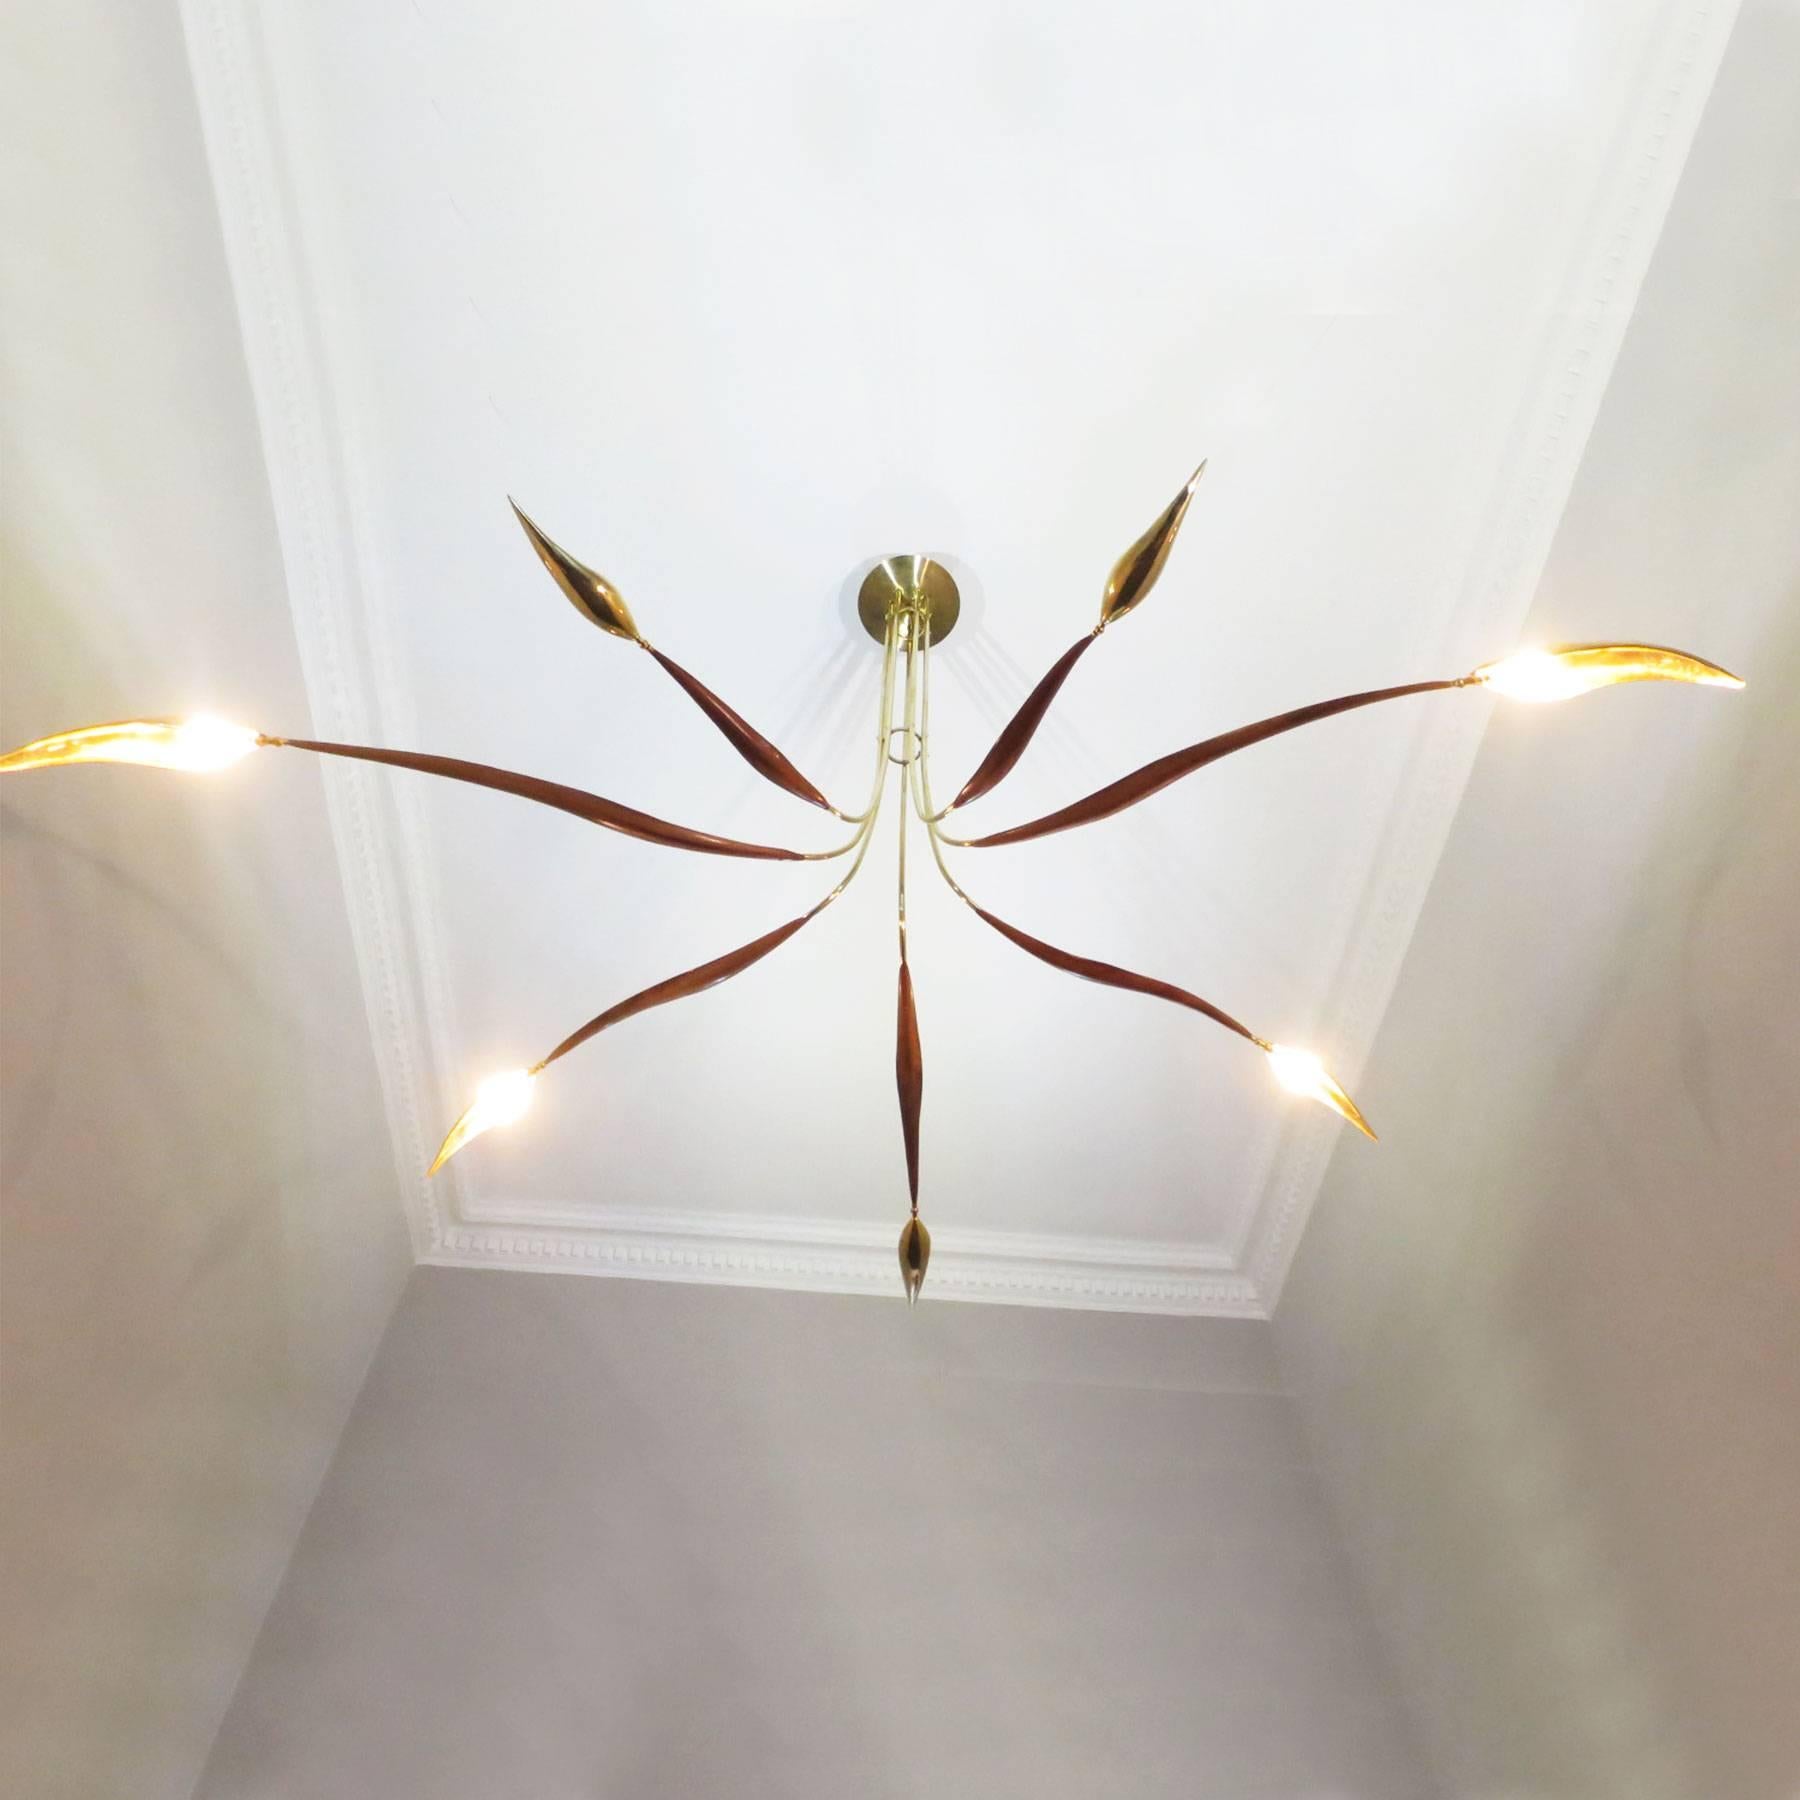 Contemporary Chrysalide Chandelier, Wood and Brass, Oma Light Design, Spain In Excellent Condition For Sale In Girona, ES